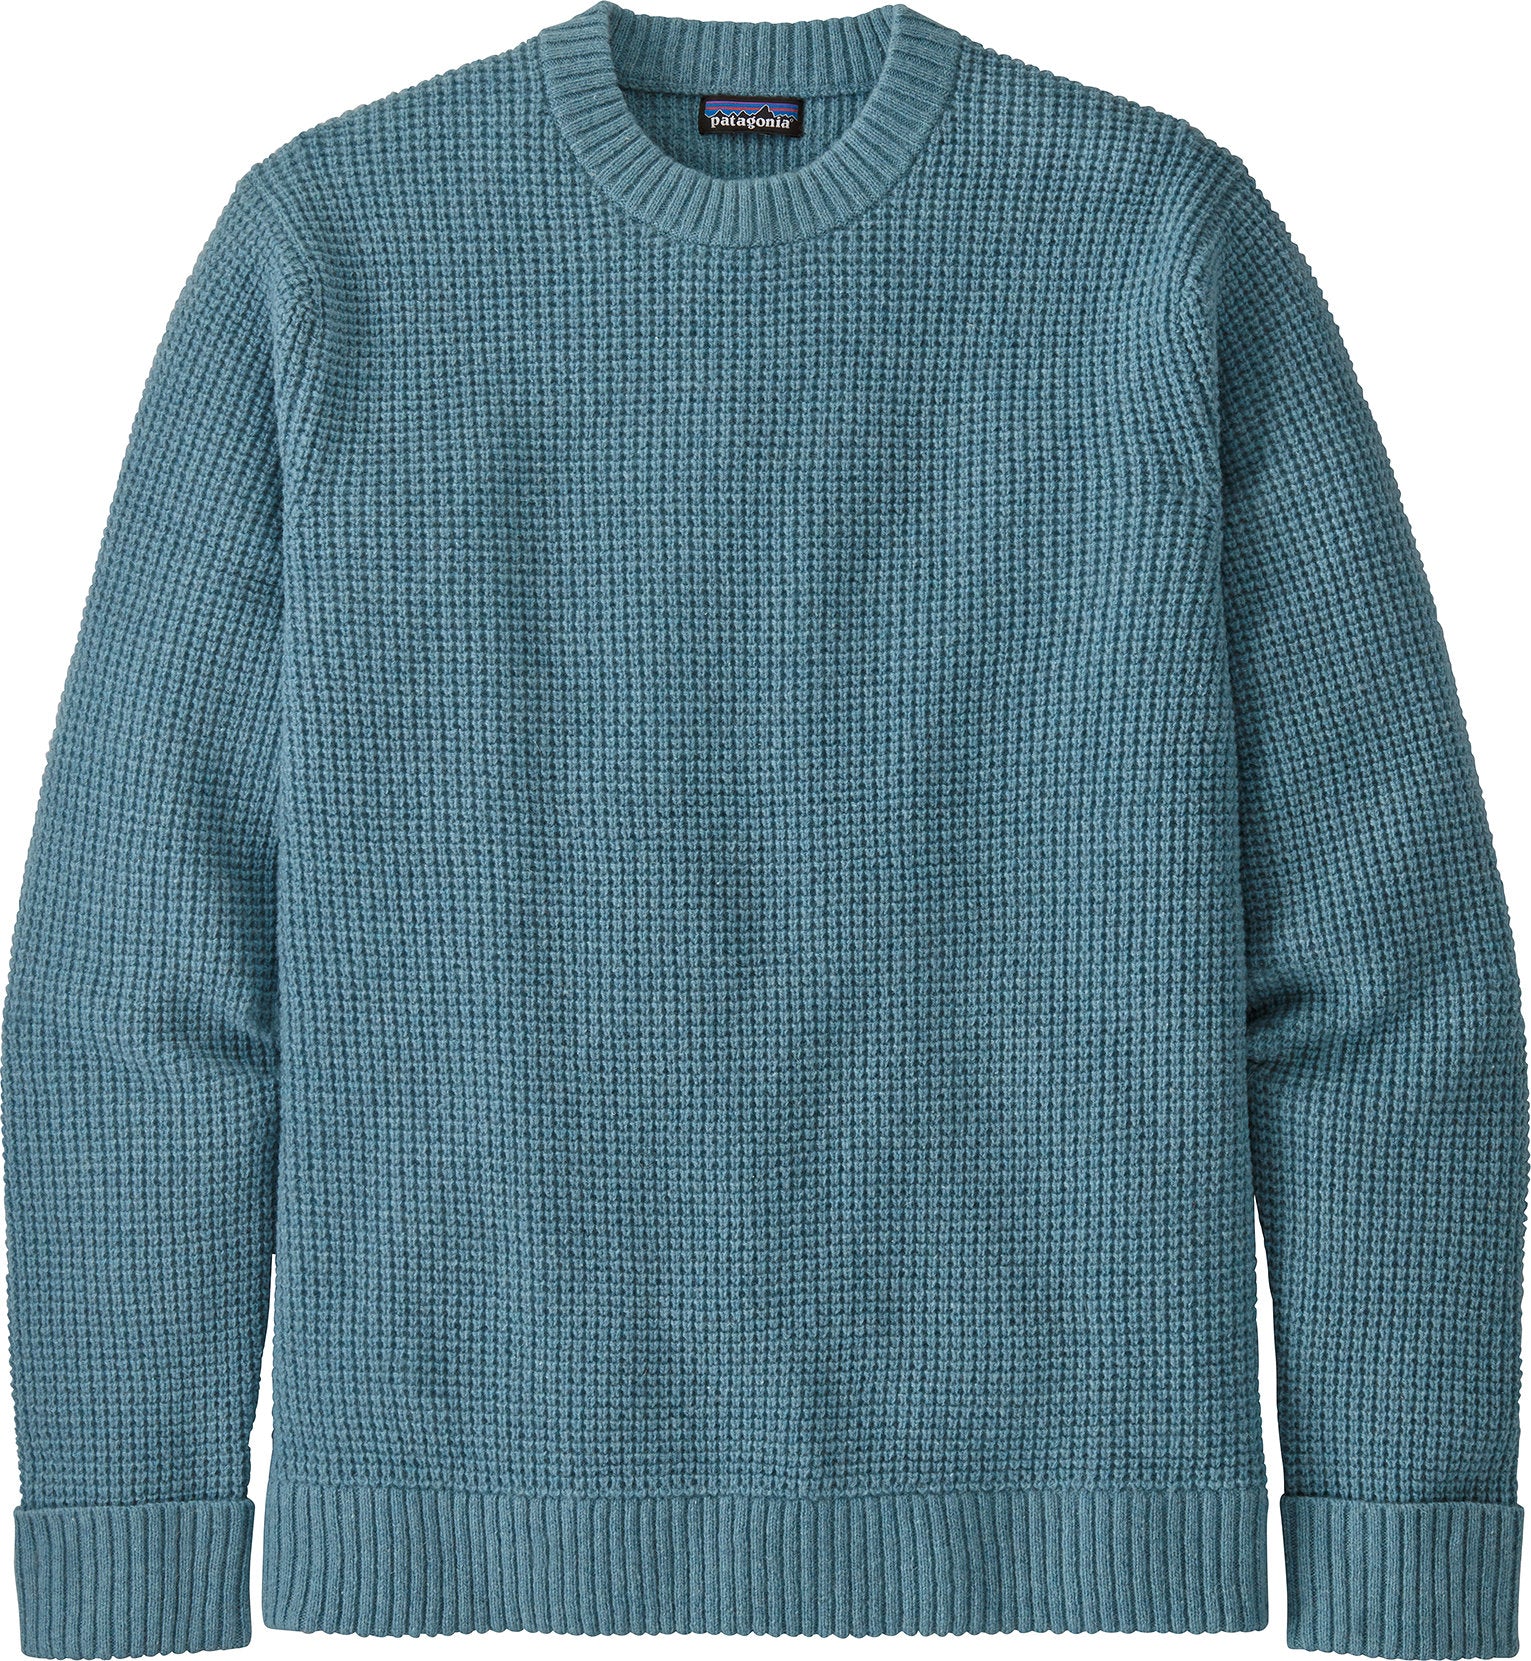 Recycled Wool Sweater, Patagonia